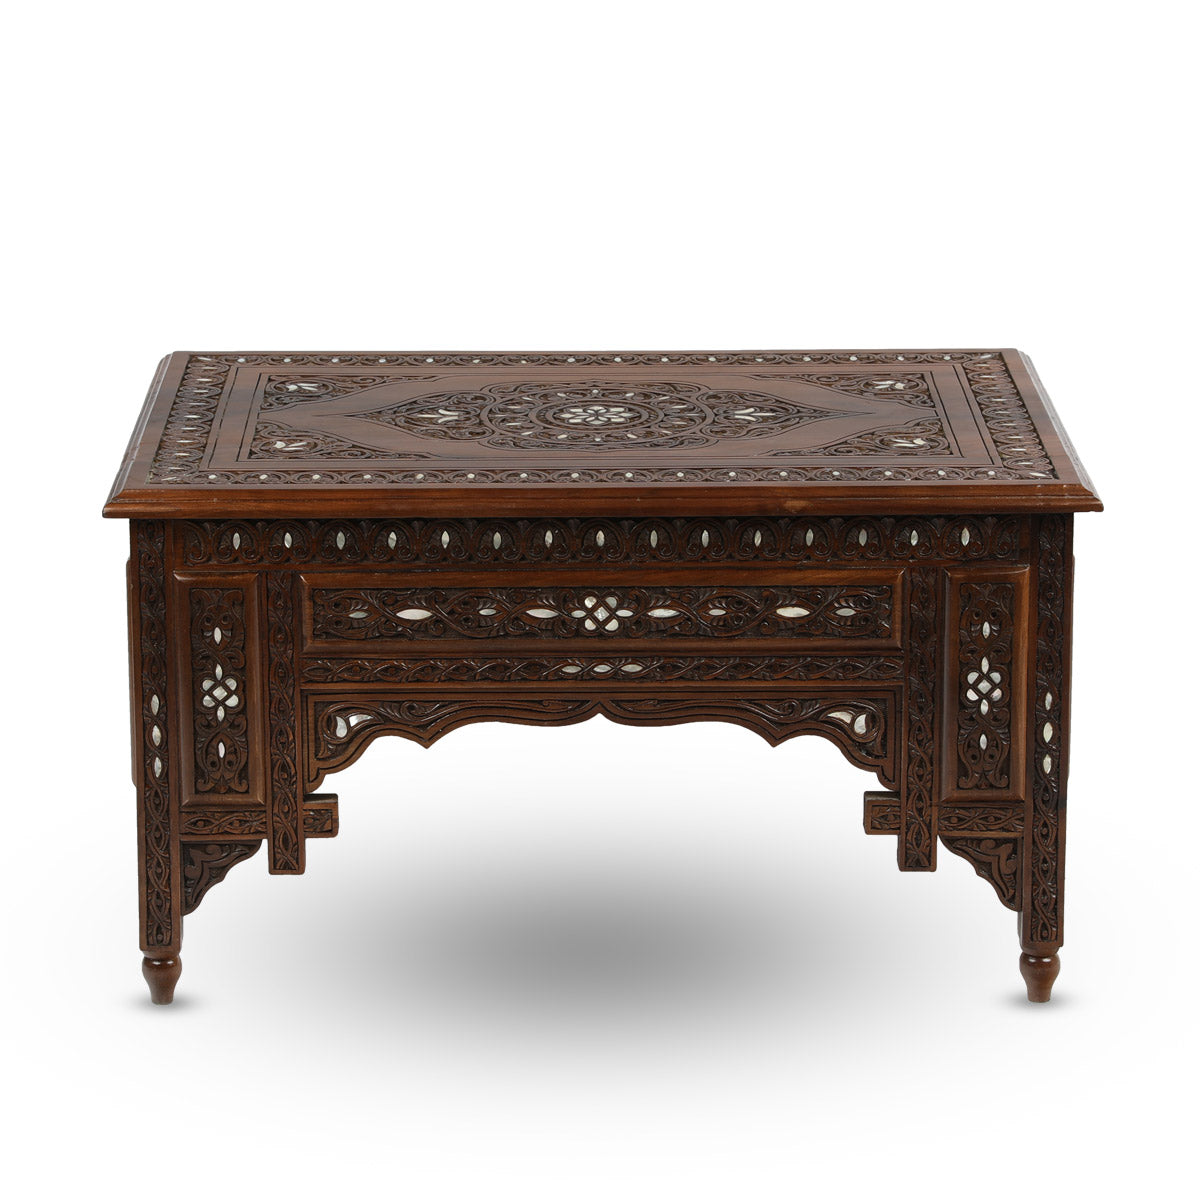 Side View of Ornate Rectangular Table